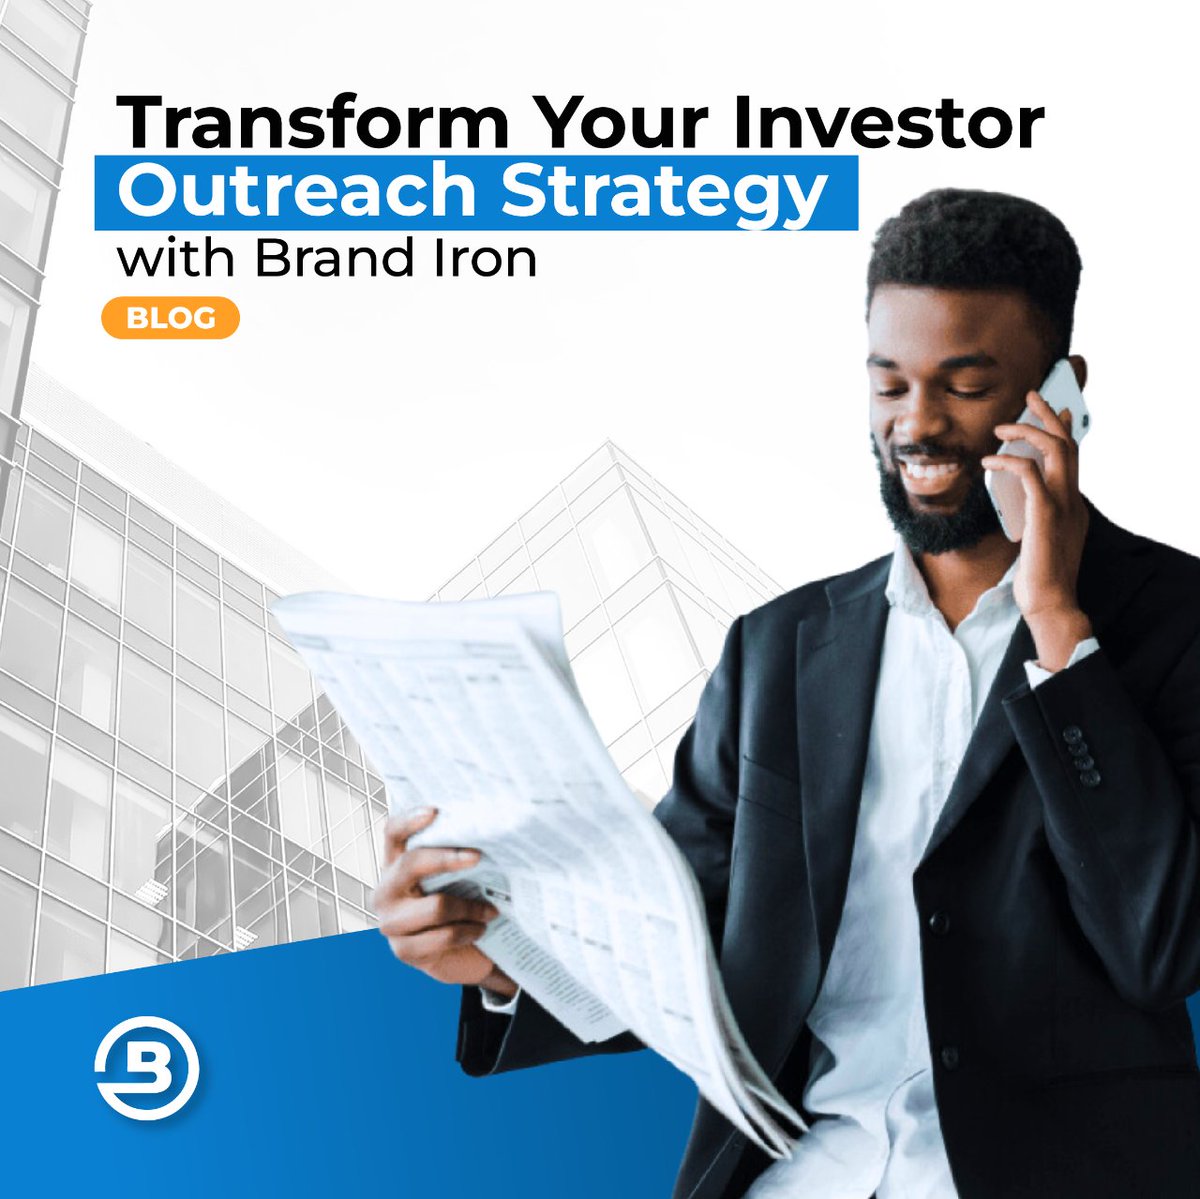 Need help looking for investors to fund your vision? Check out our latest blog on our Investor Outreach Services and see how we can help match you with your ideal client.  Strengthen your relationships and get the capital you need. #brandiron #investoroutreach